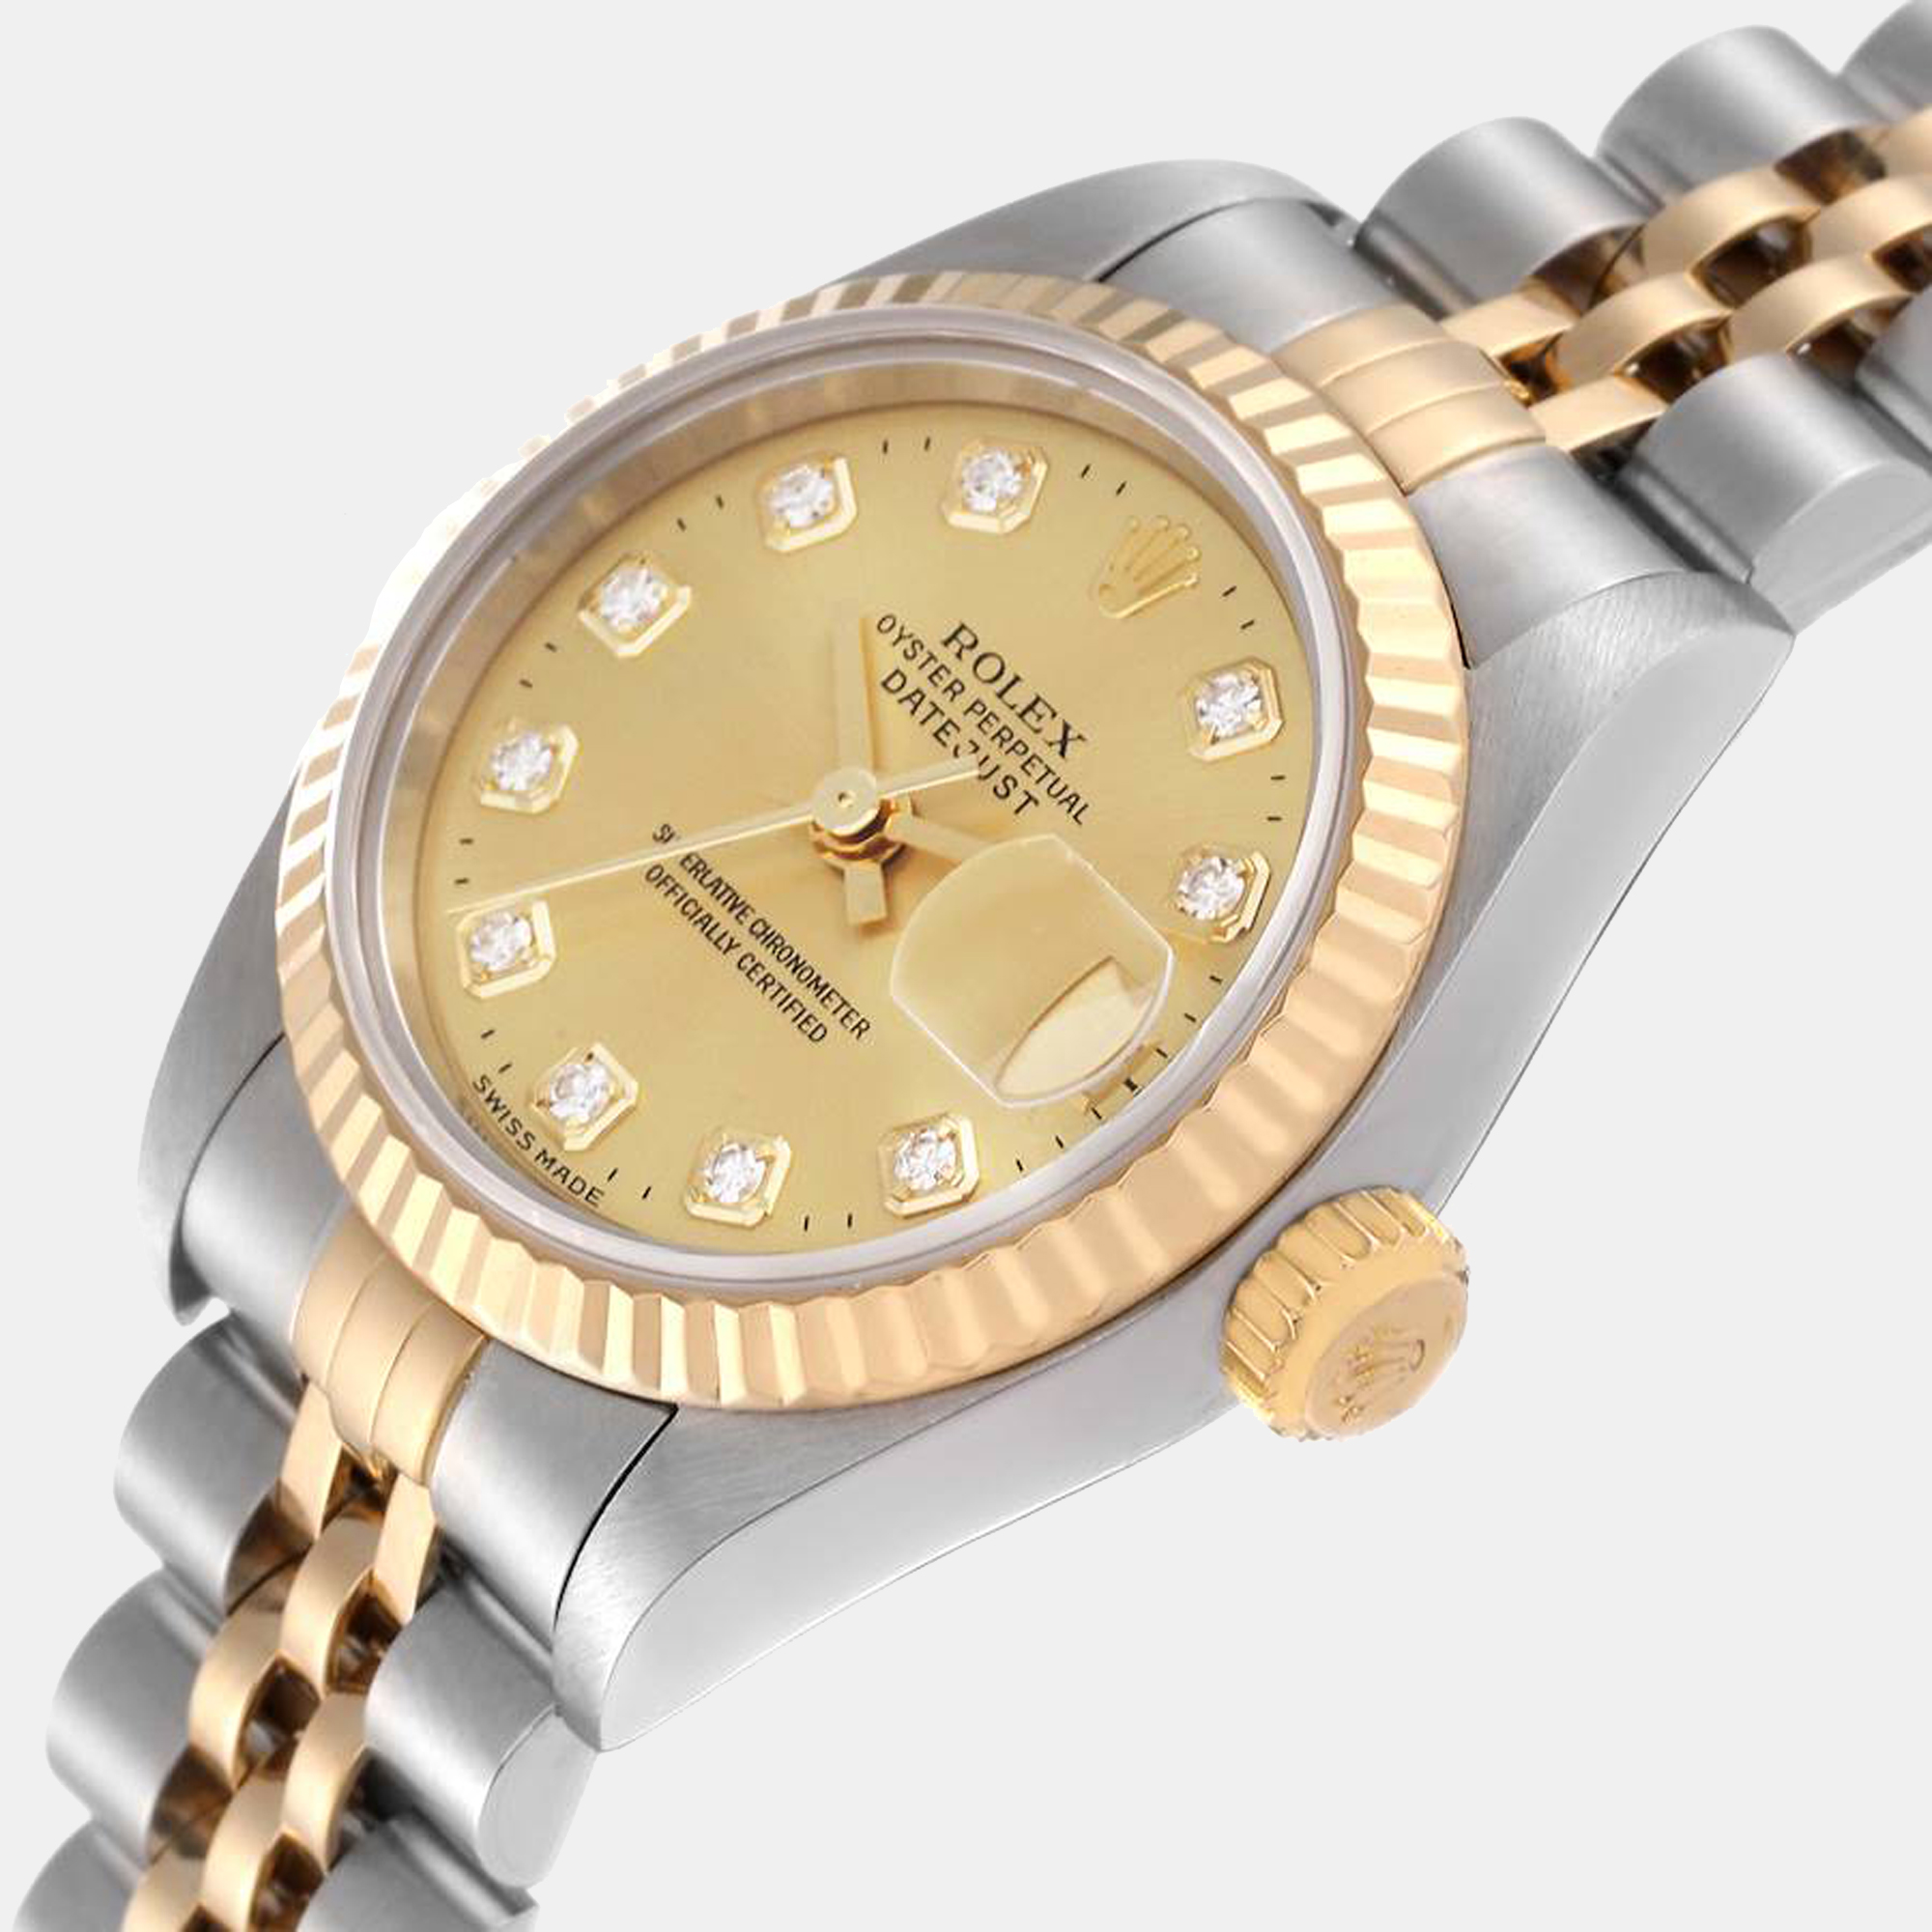 

Rolex Champagne Diamonds 18K Yellow Gold And Stainless Steel Datejust 79173 Women's Wristwatch 26 mm